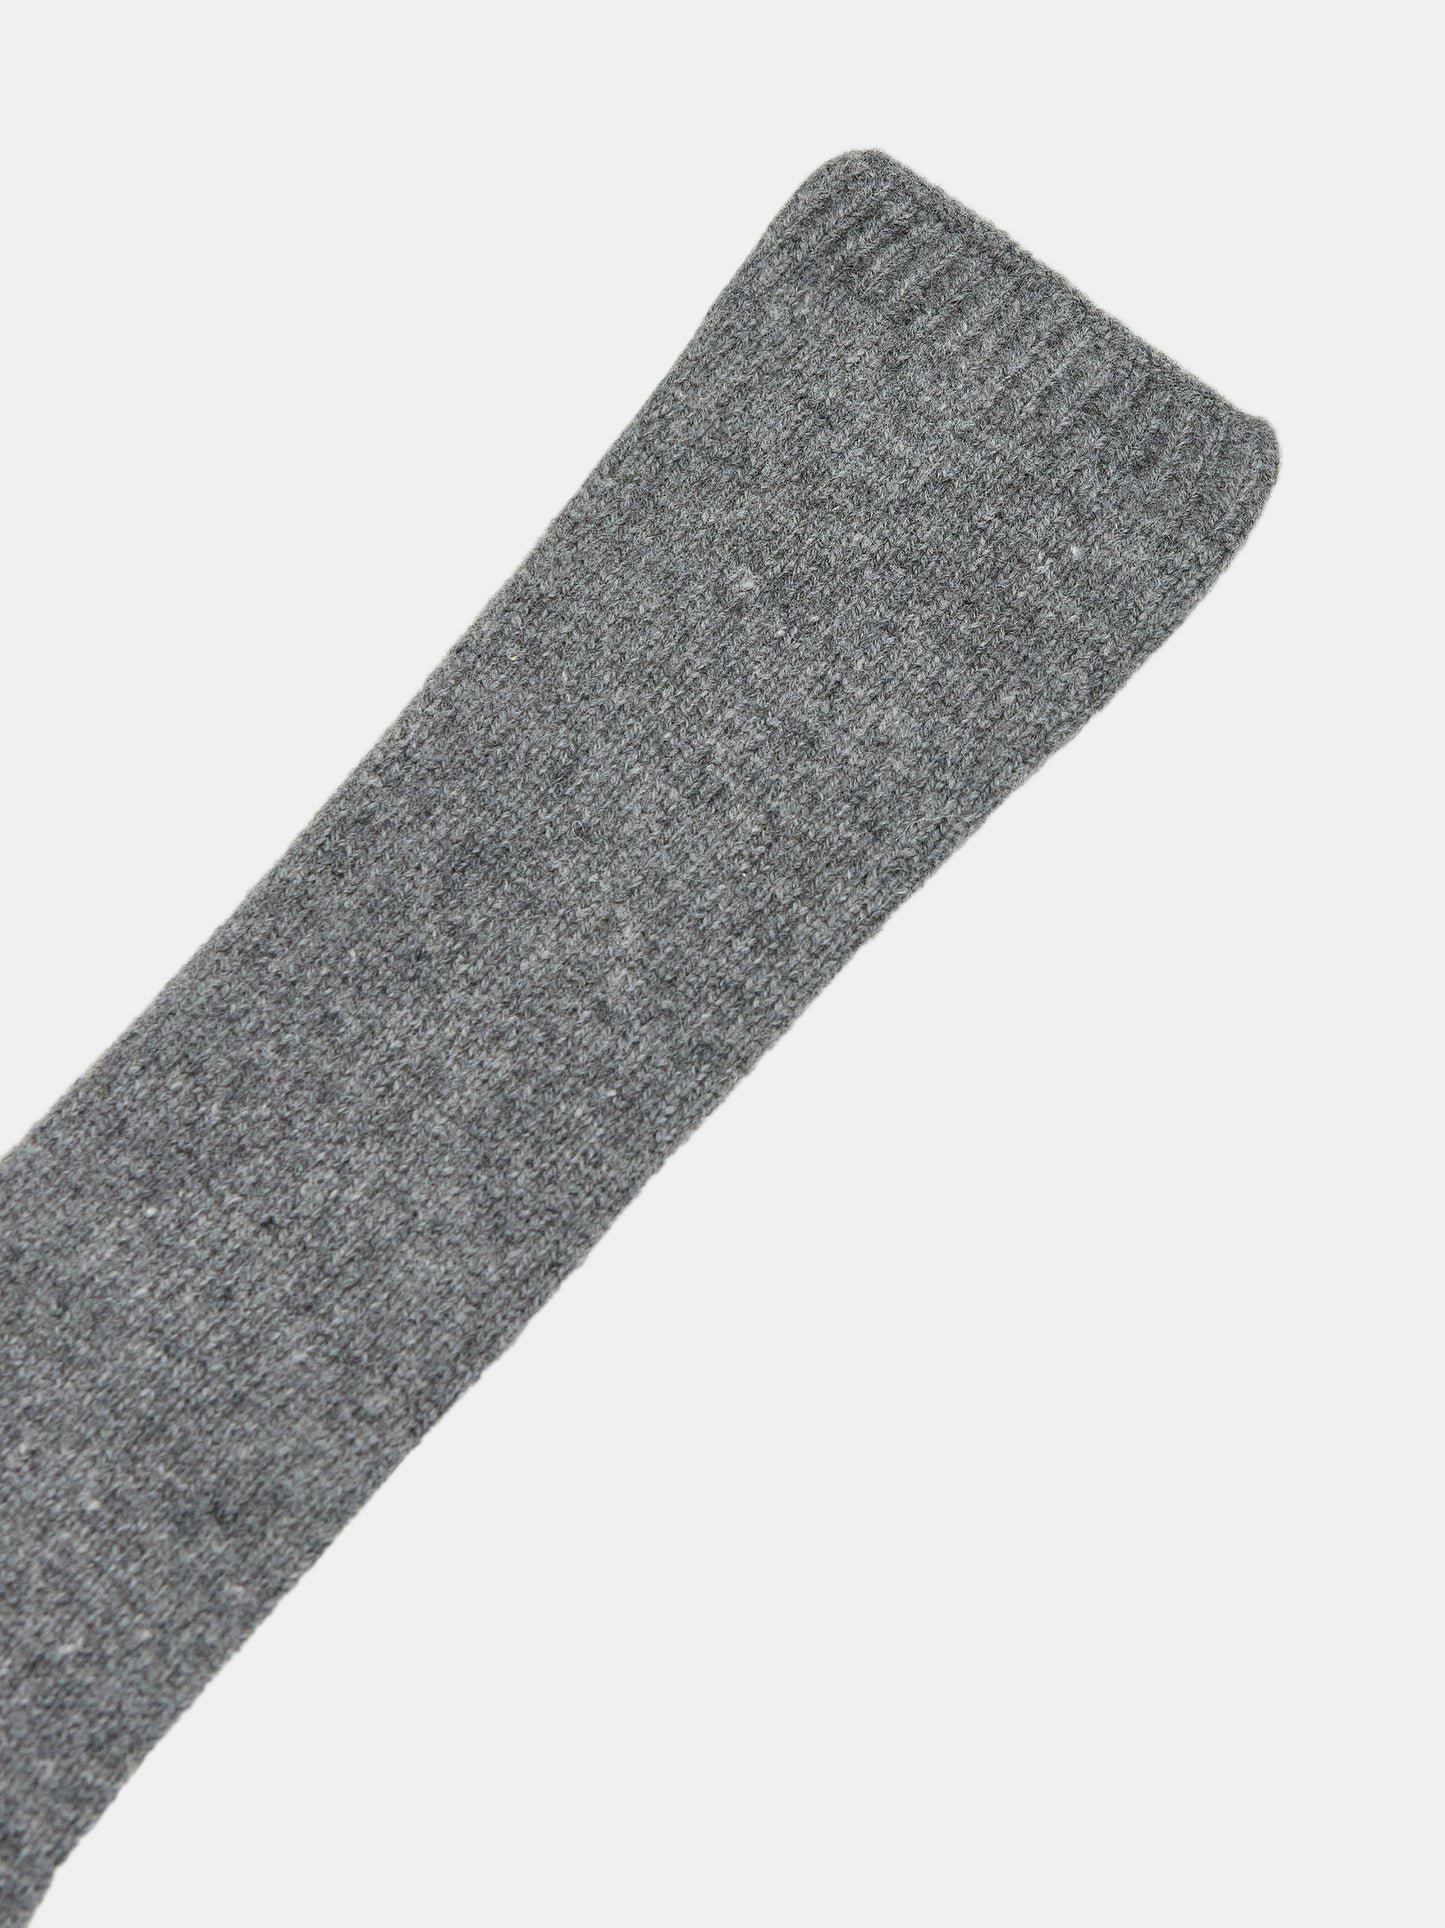 Long Wool-Cashmere Gloves, Grey